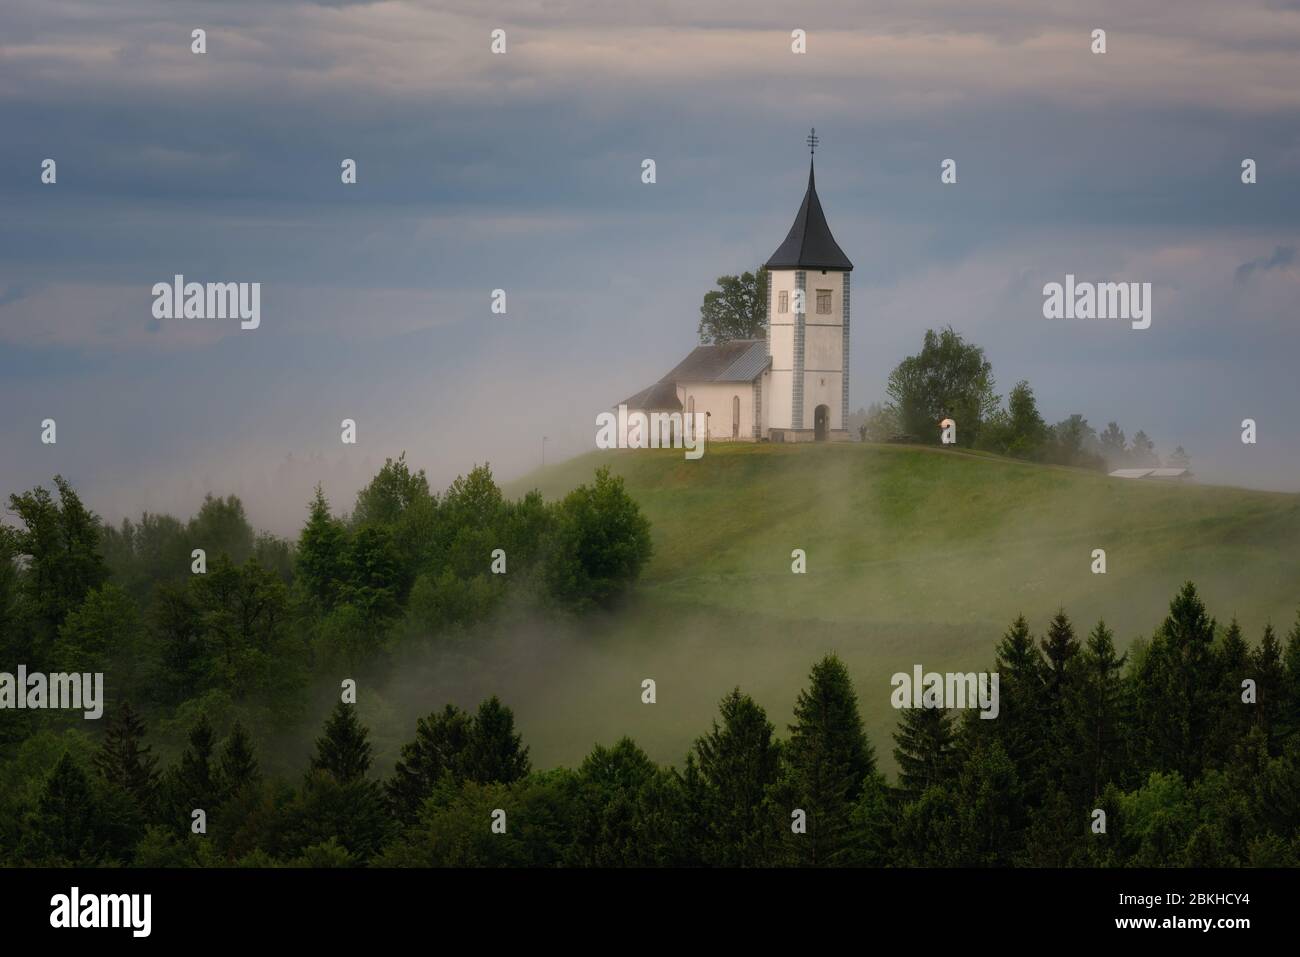 Jamnik church on a hillside in the spring, foggy weather at sunset in Slovenia, Europe. Mountain landscape shortly after spring rain. Slovenian Alps. Stock Photo